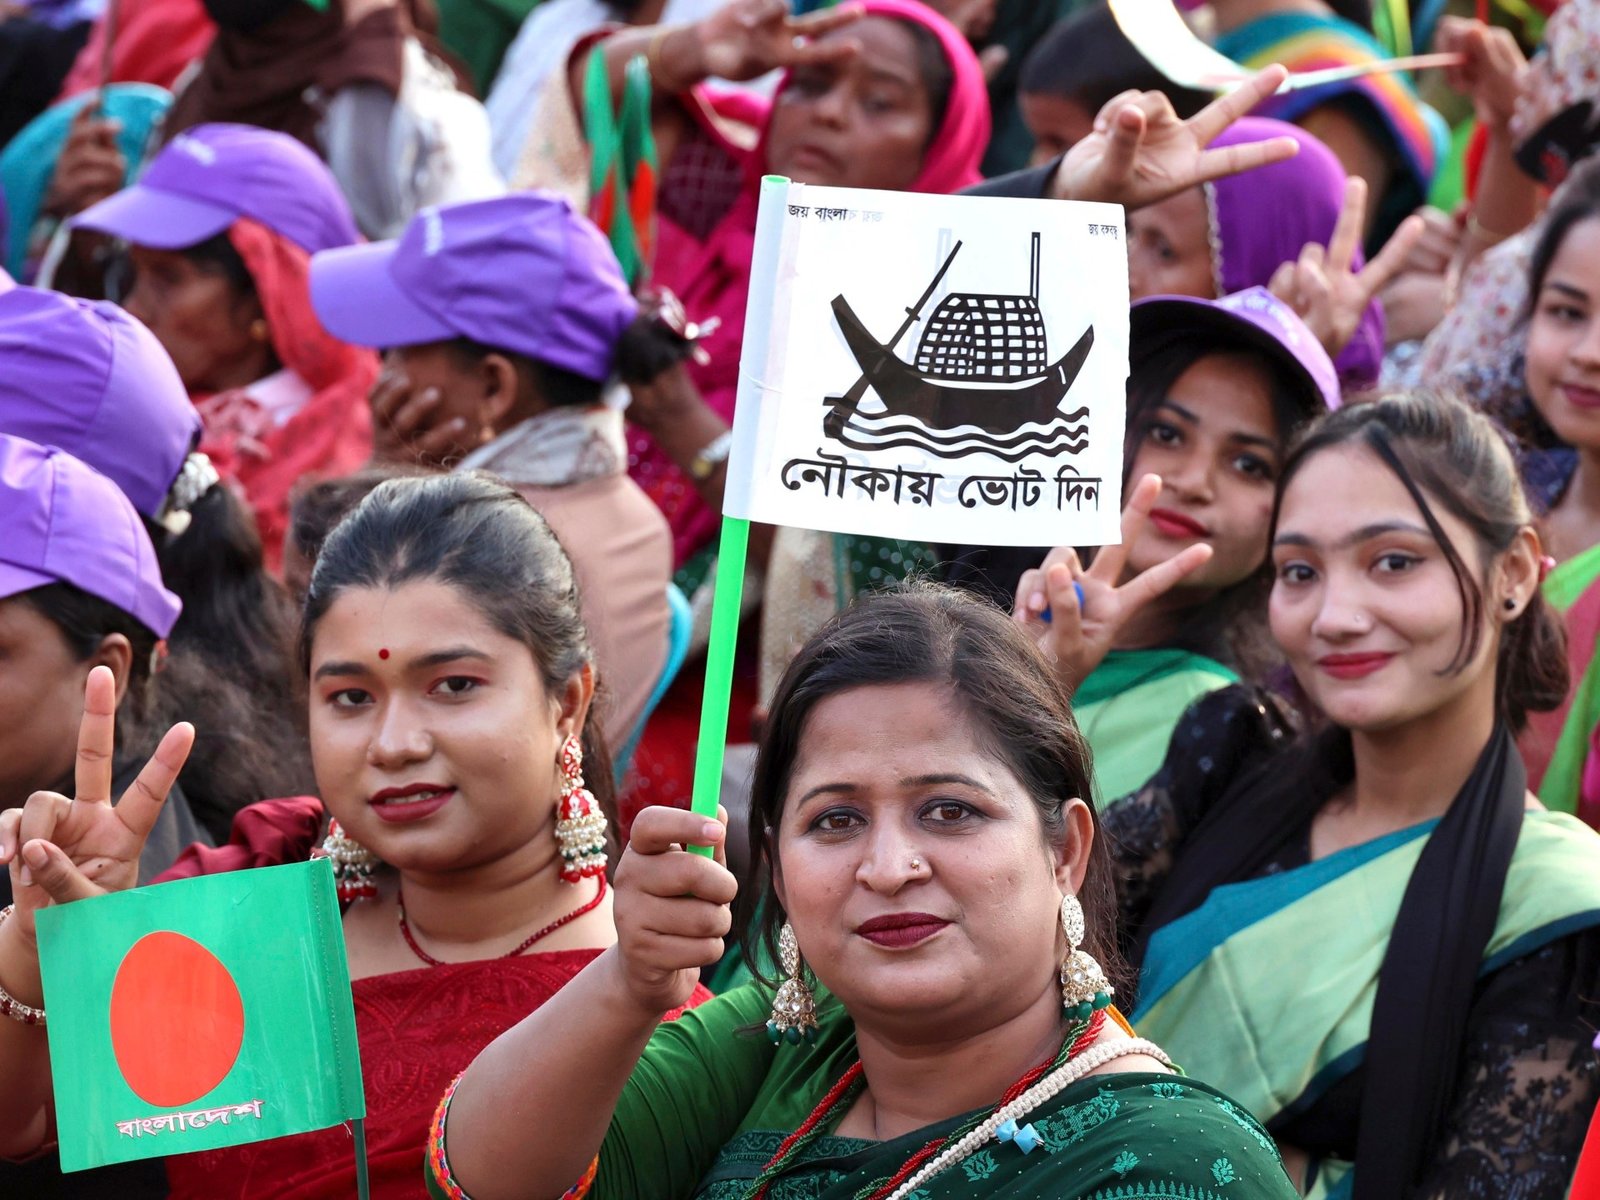 Bangladesh elections mark a pro China tipping point in South Asia | Politics